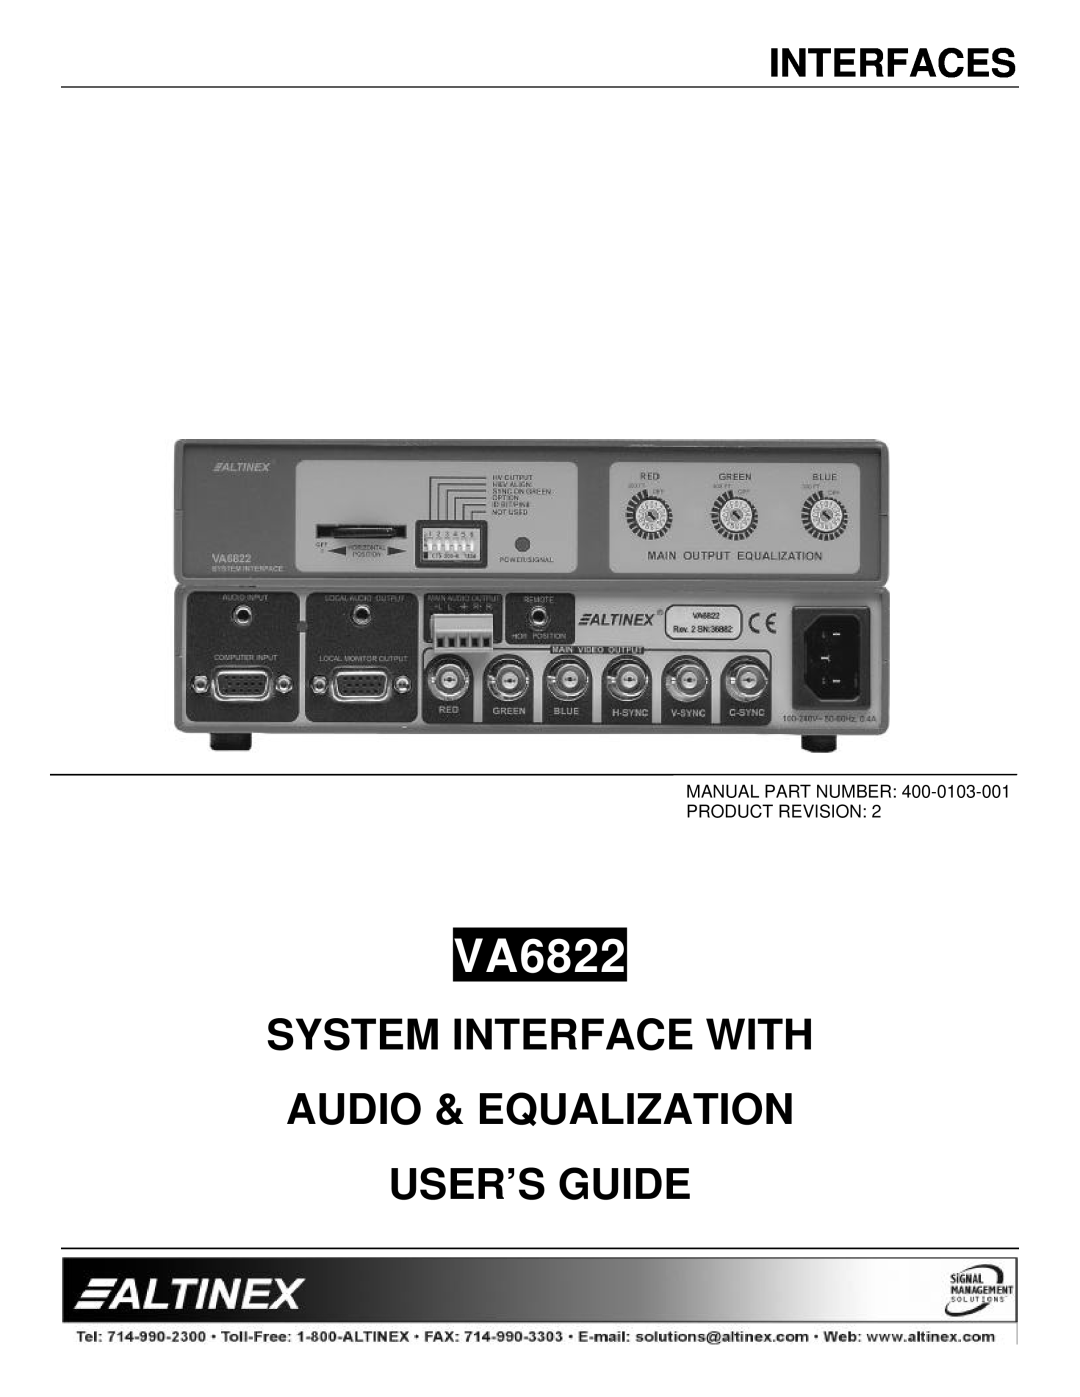 Altinex VA6822 manual Interfaces, System Interface With Audio & Equalization, User’S Guide 